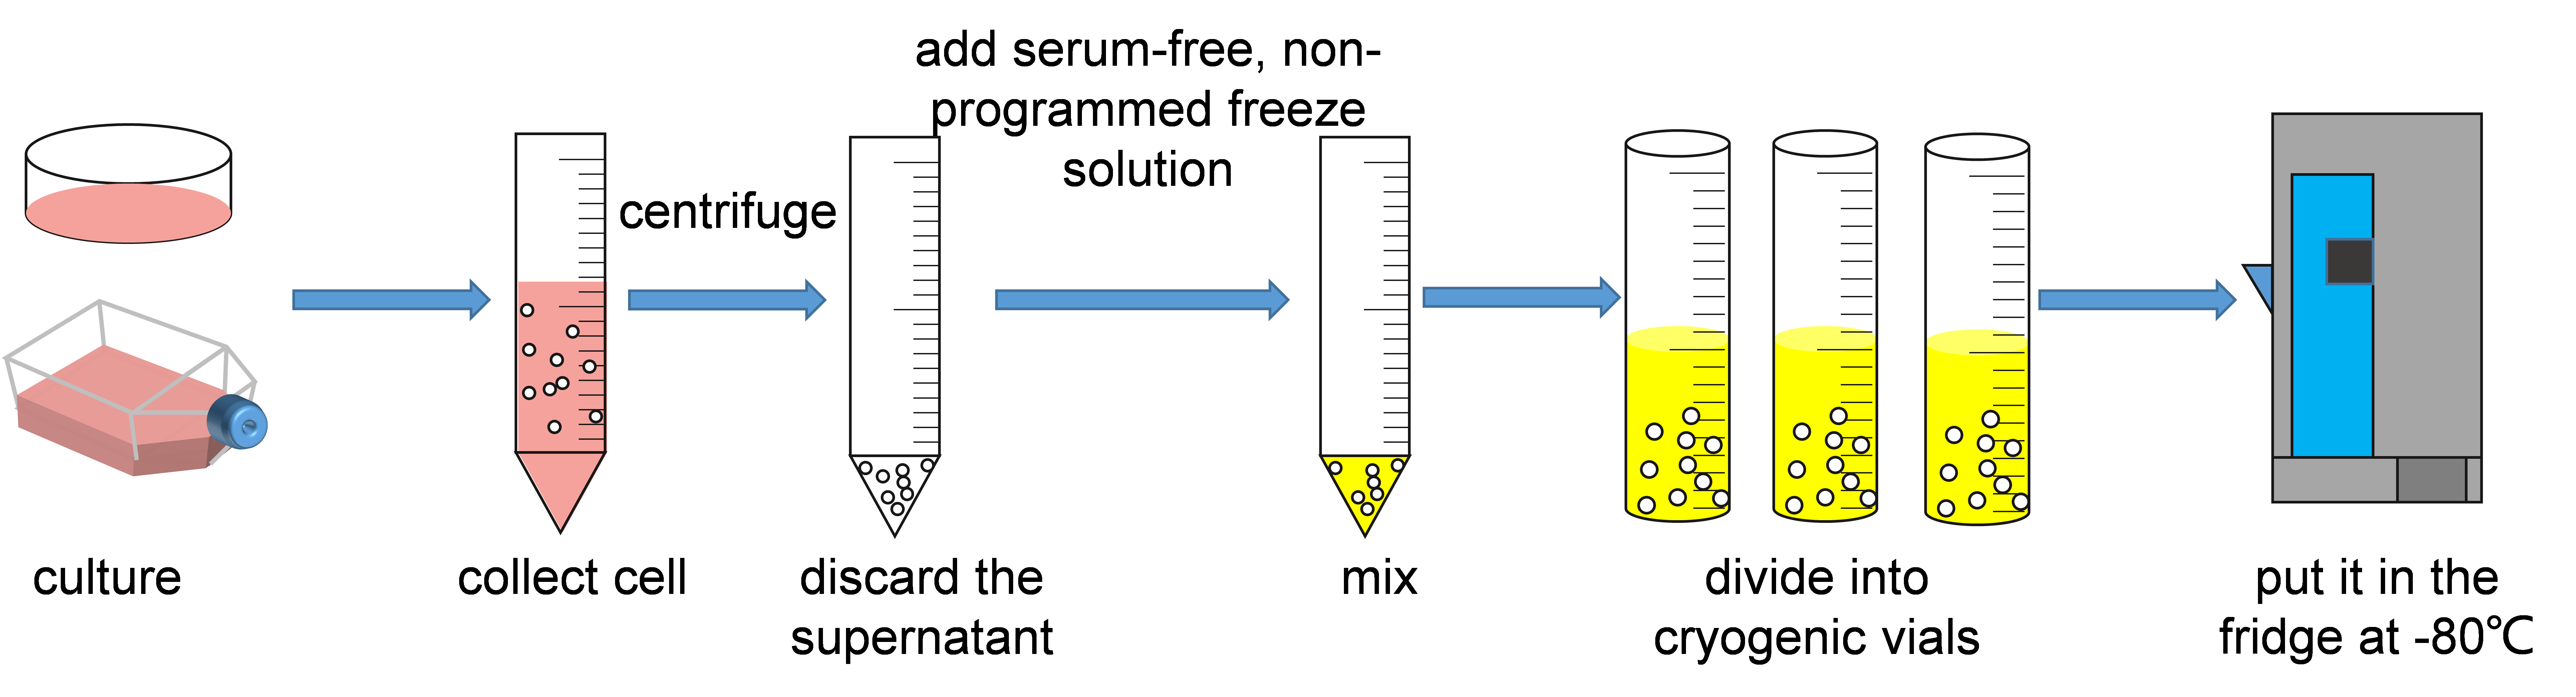 Schematic diagram of using serum-free non-programmed cryopreservation solution.